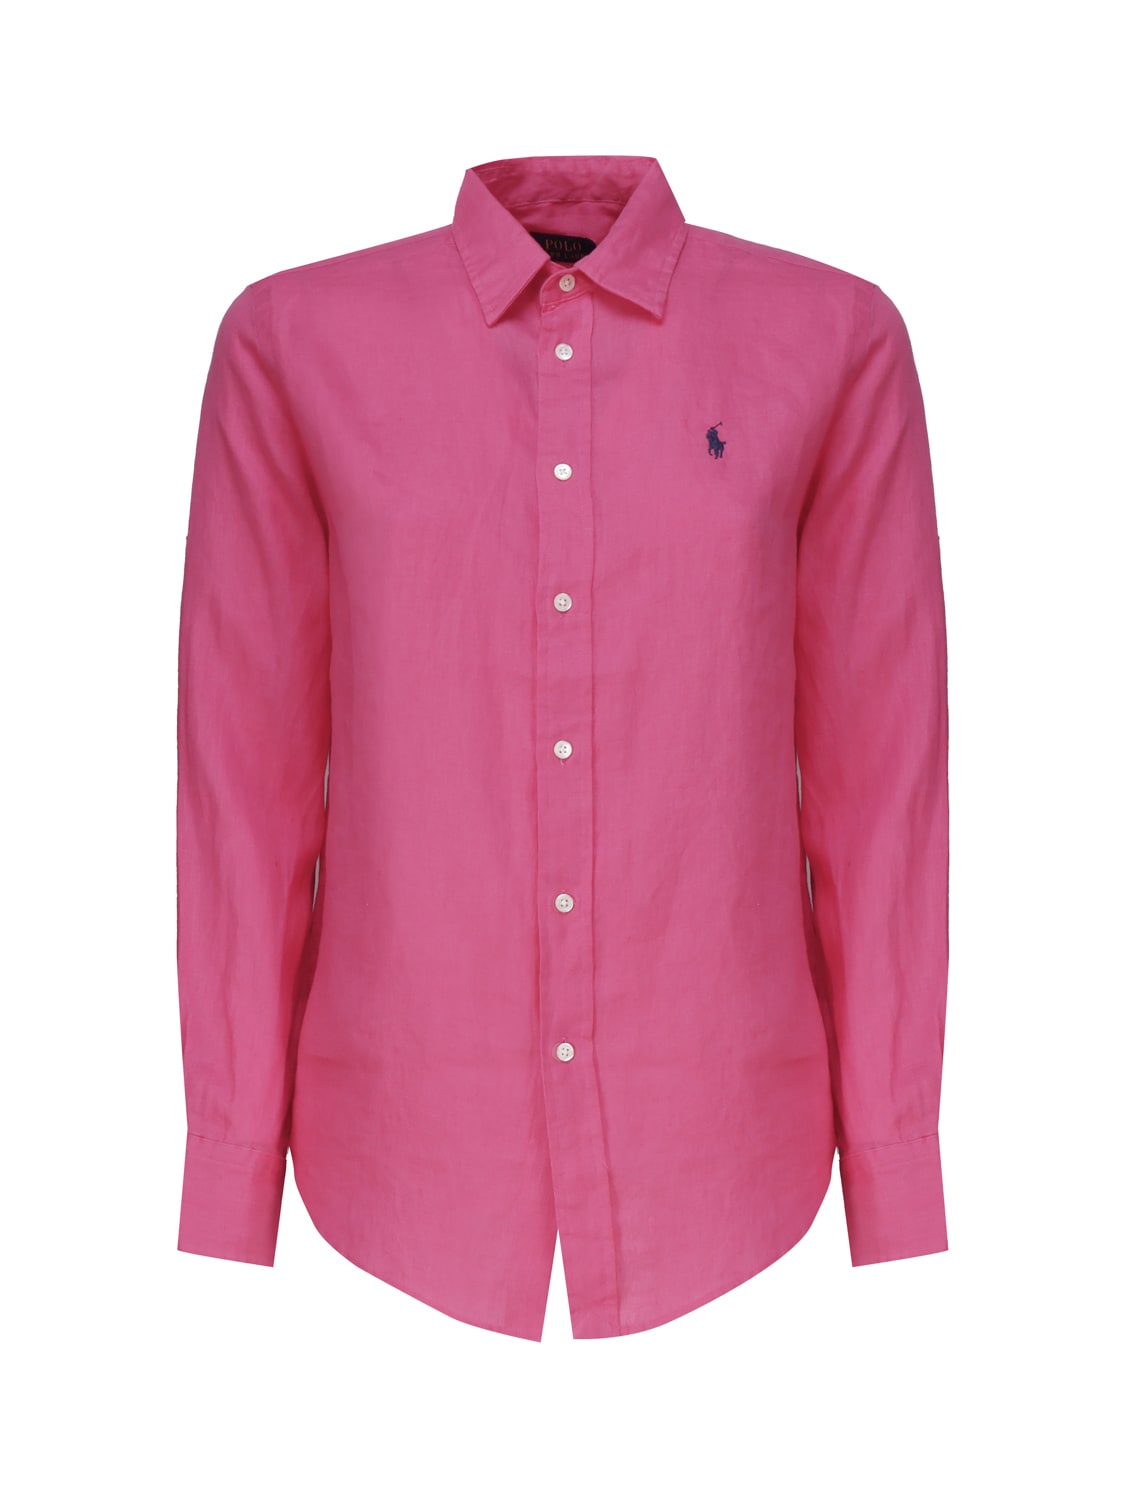 POLO RALPH LAUREN SHIRT WITH POLO PONY EMBROIDERY